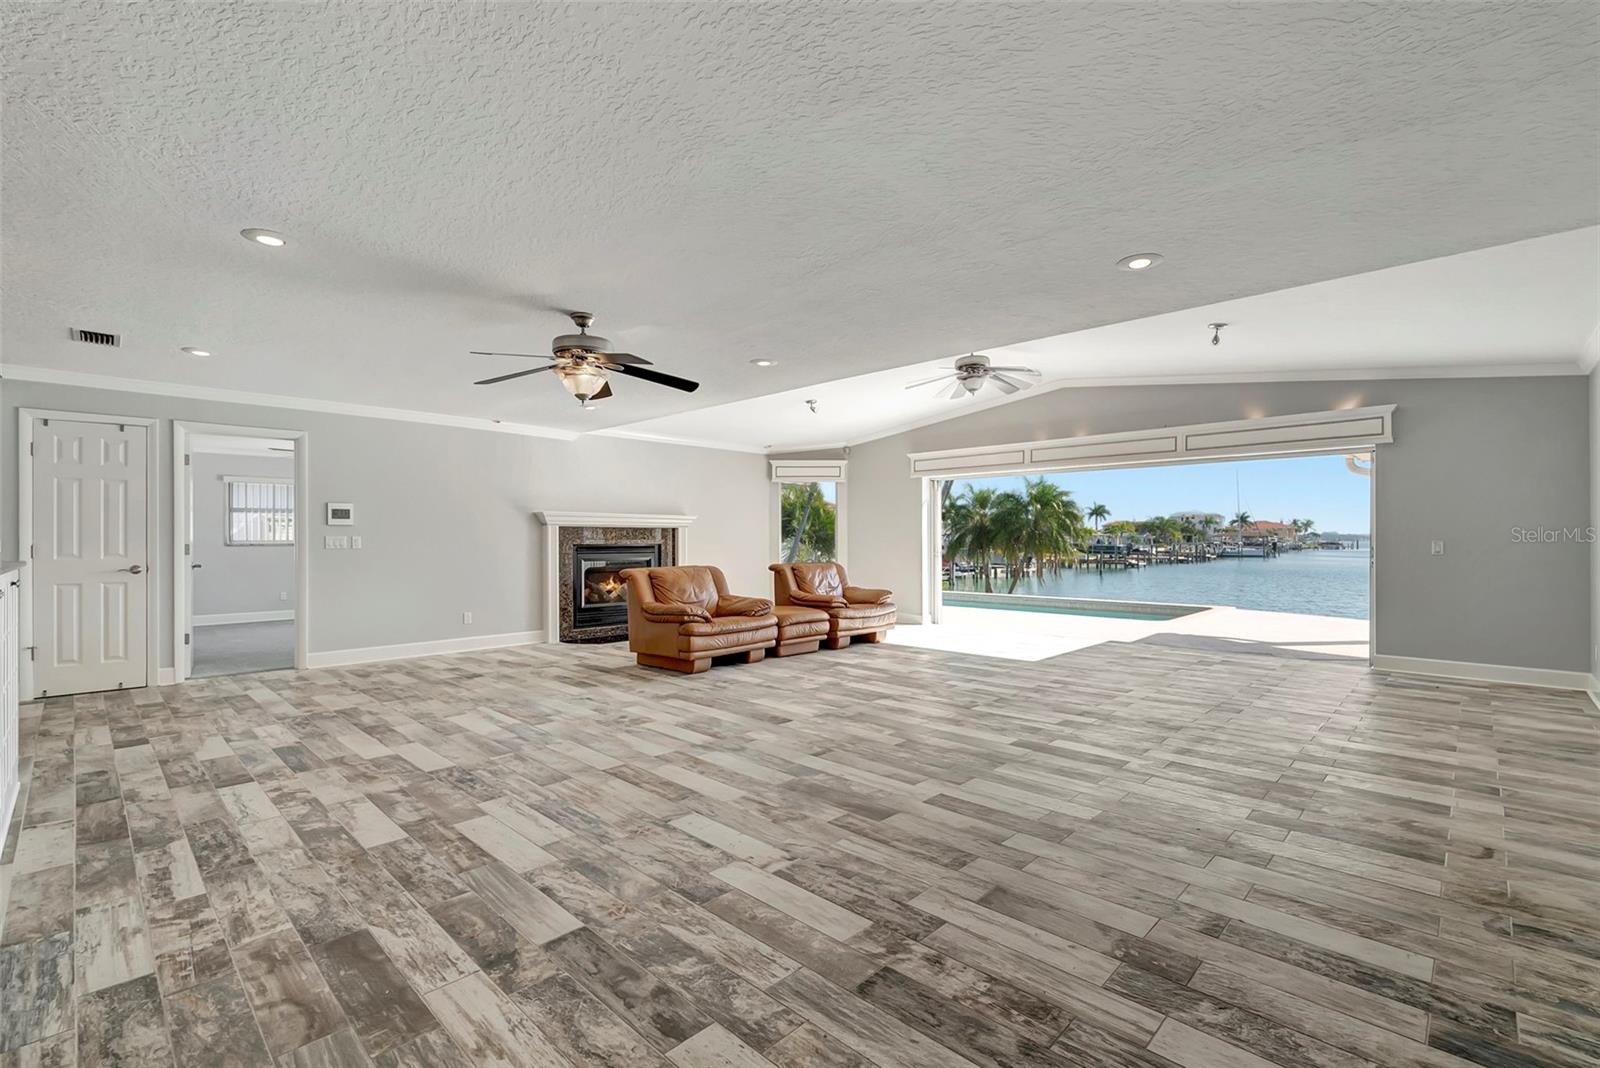 Step into luxury and comfort with our expansive great room, featuring a large sliding door that opens up to the inviting pool area and mesmerizing water views beyond.